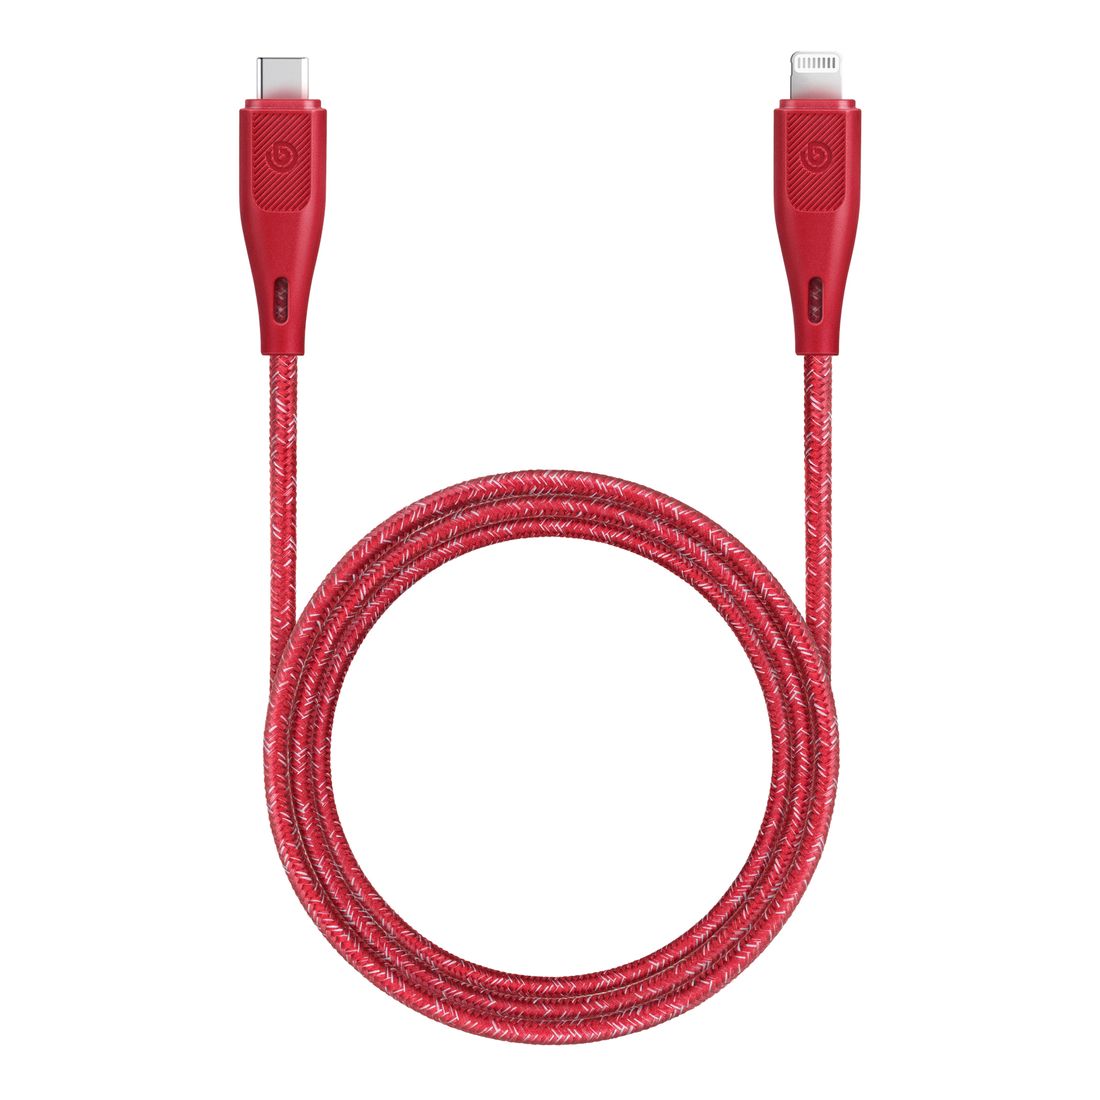 Bazic Gocharge USB-C to Lightning C94 MFi Braided Cable 1.2m - Red